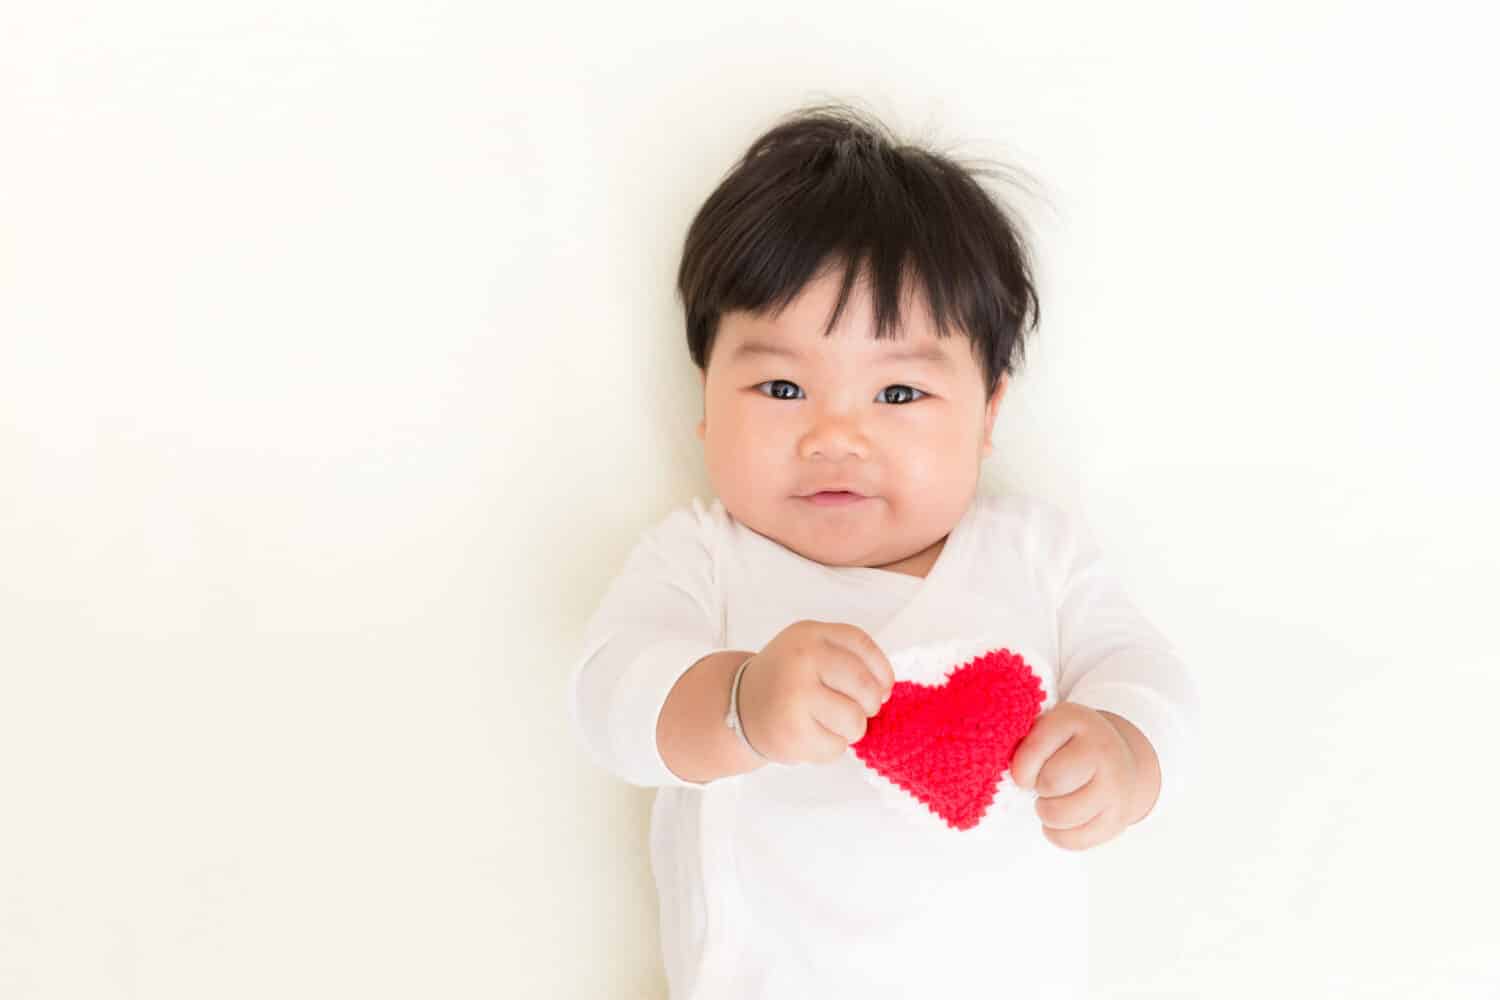 Red heart with adorable asian baby girl for valentine concept background and copy space.